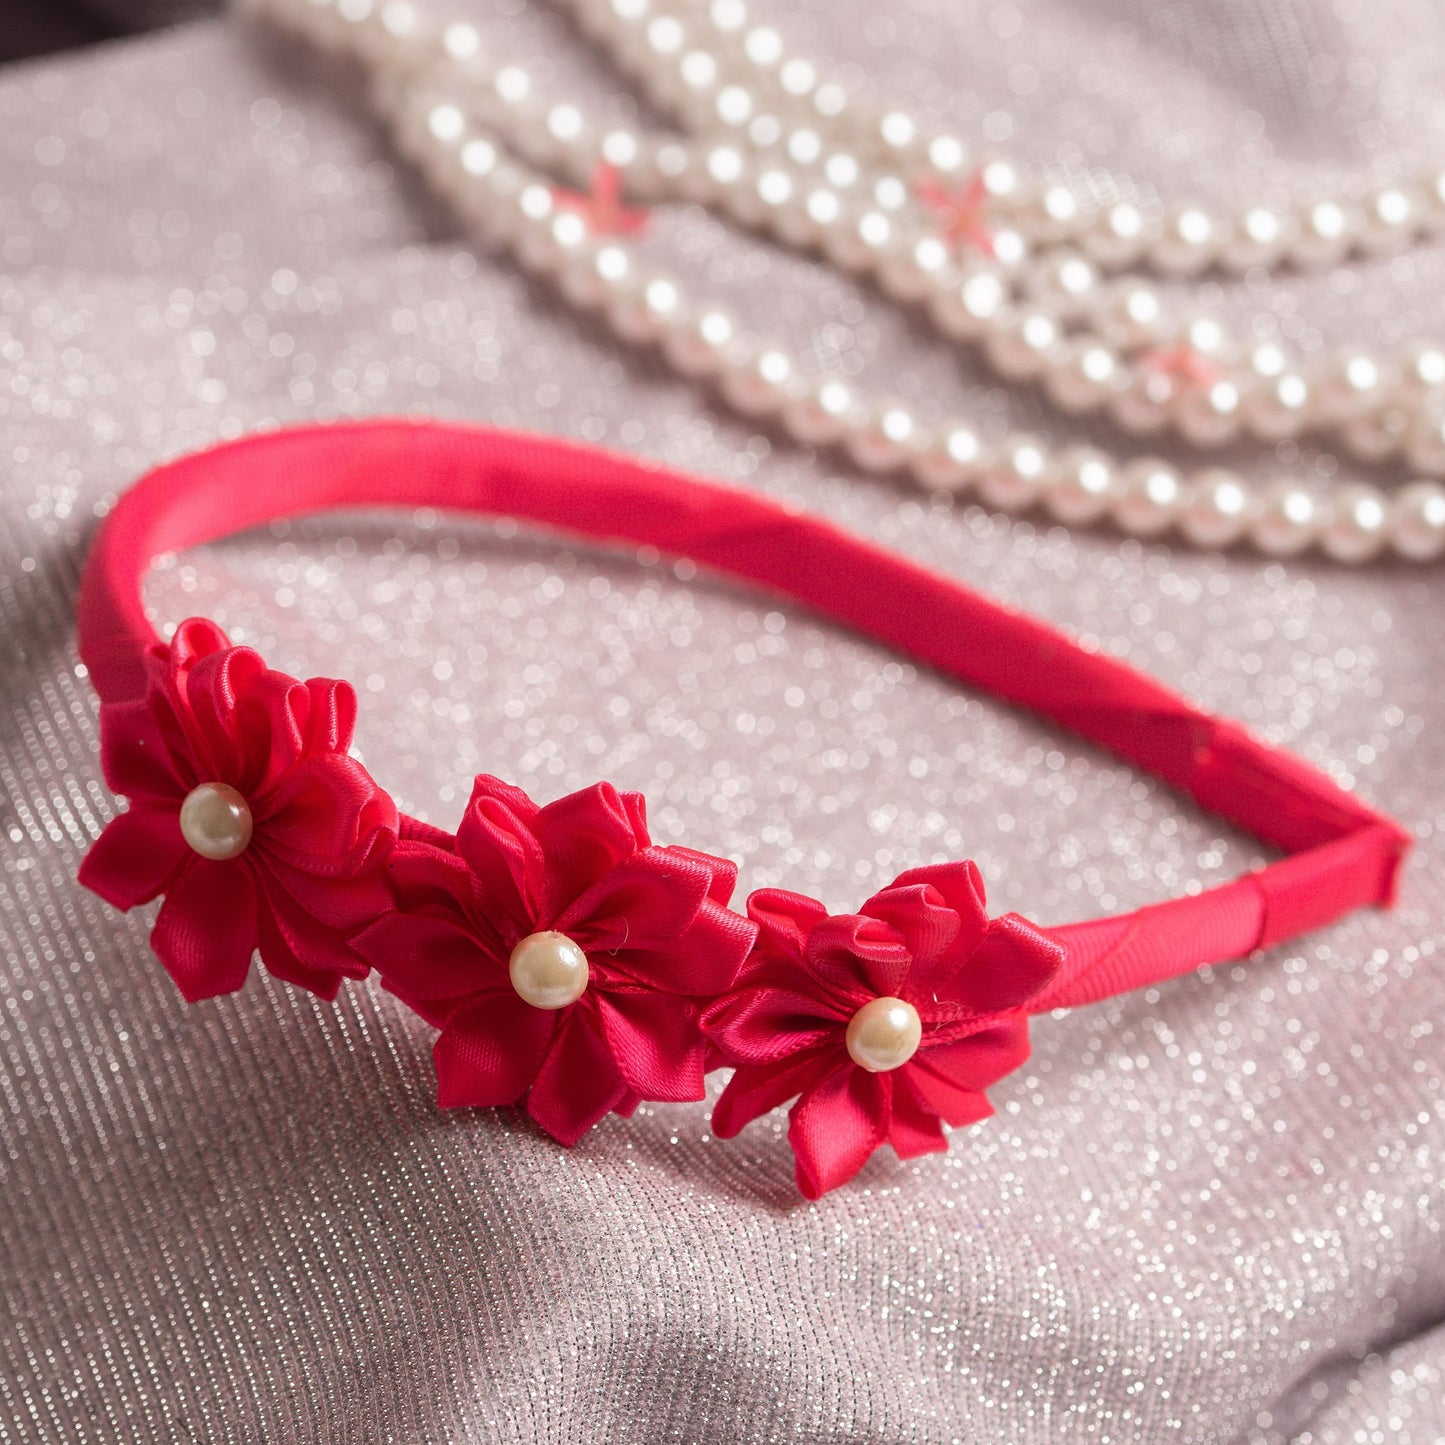 Ribbon Candy - Triple Satin Flower Hairband with Pearl Detailing- Hot Pink